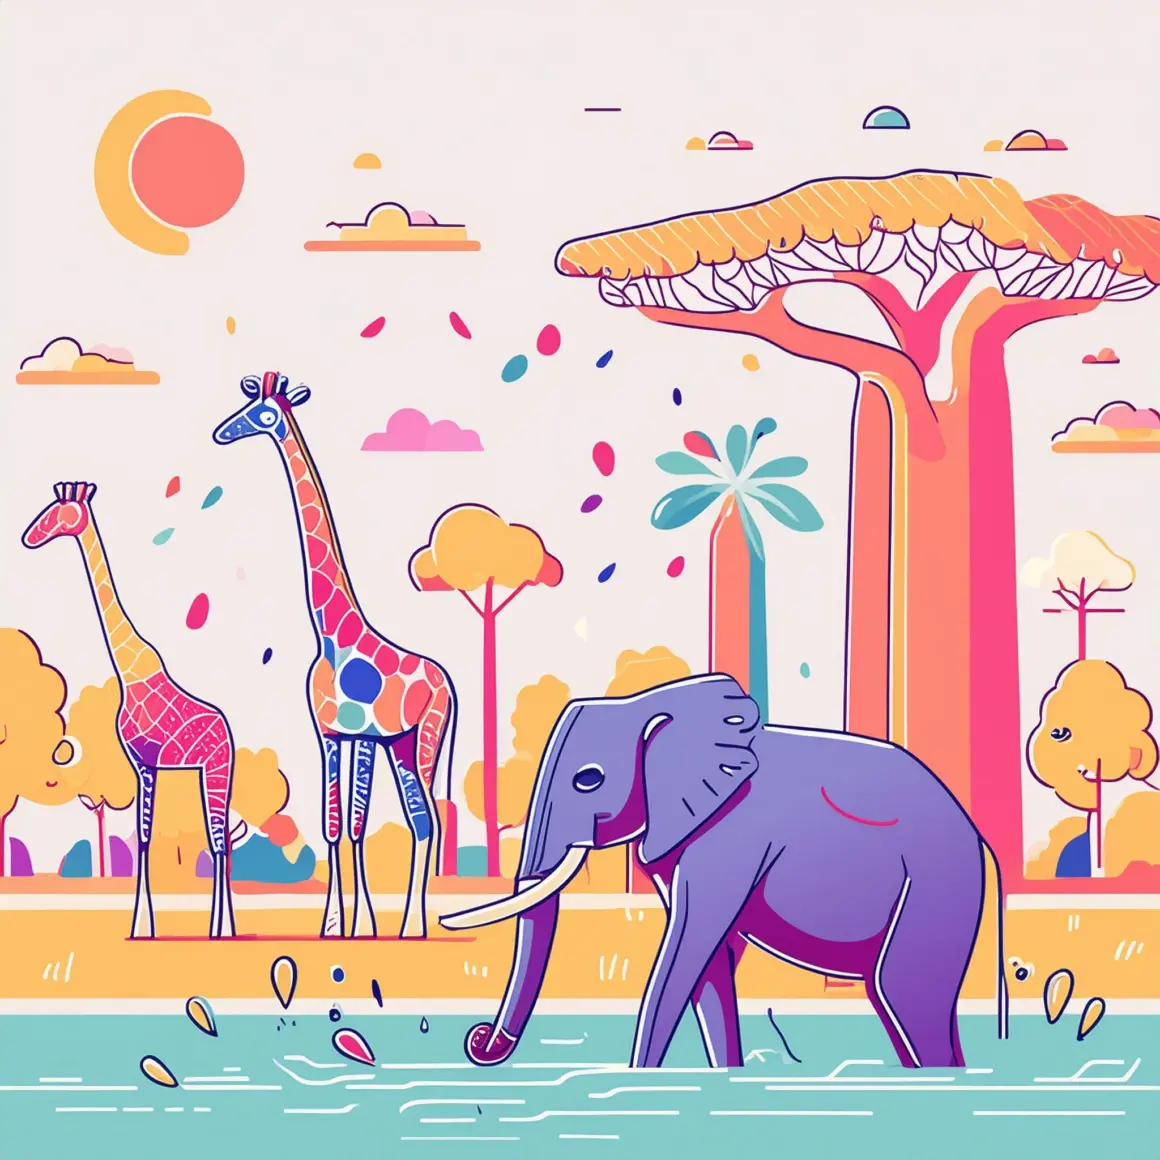 Style Reference image output 2 to mirror colored vector image amazonian forest elephant drinking water with giraffes